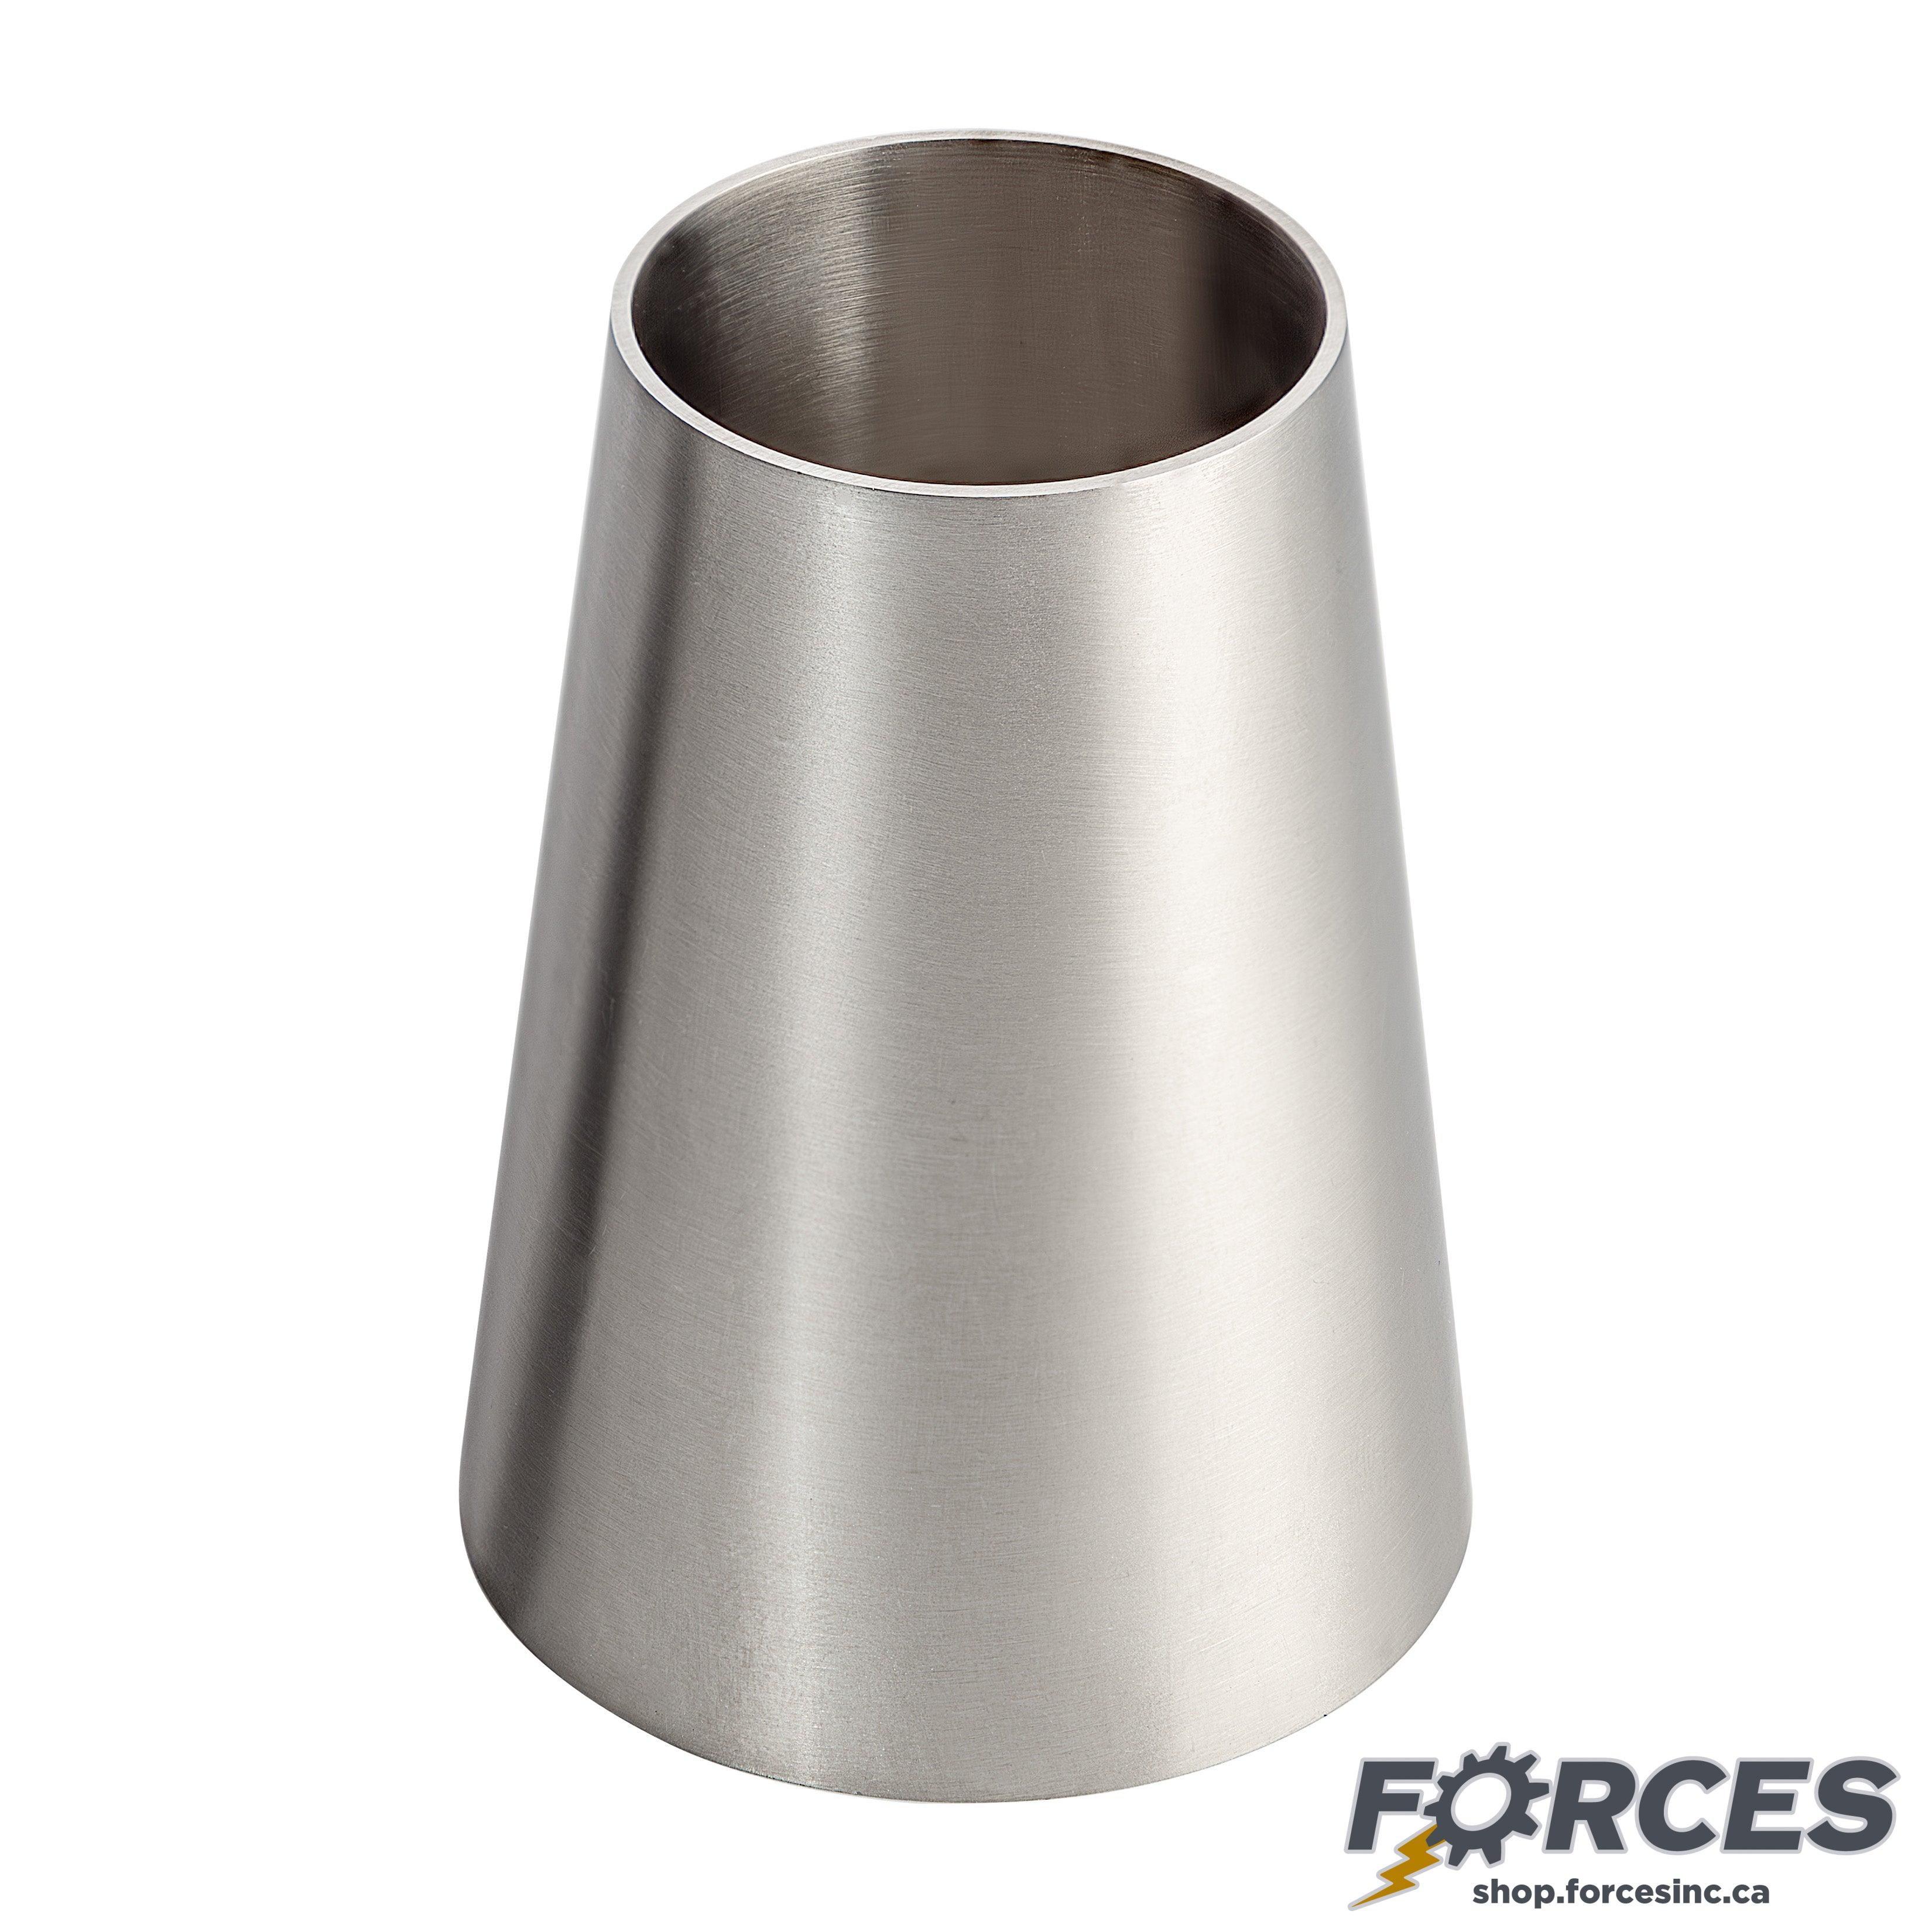 3" x 2" Butt Weld Concentric Reducer - Stainless Steel 316 - Forces Inc